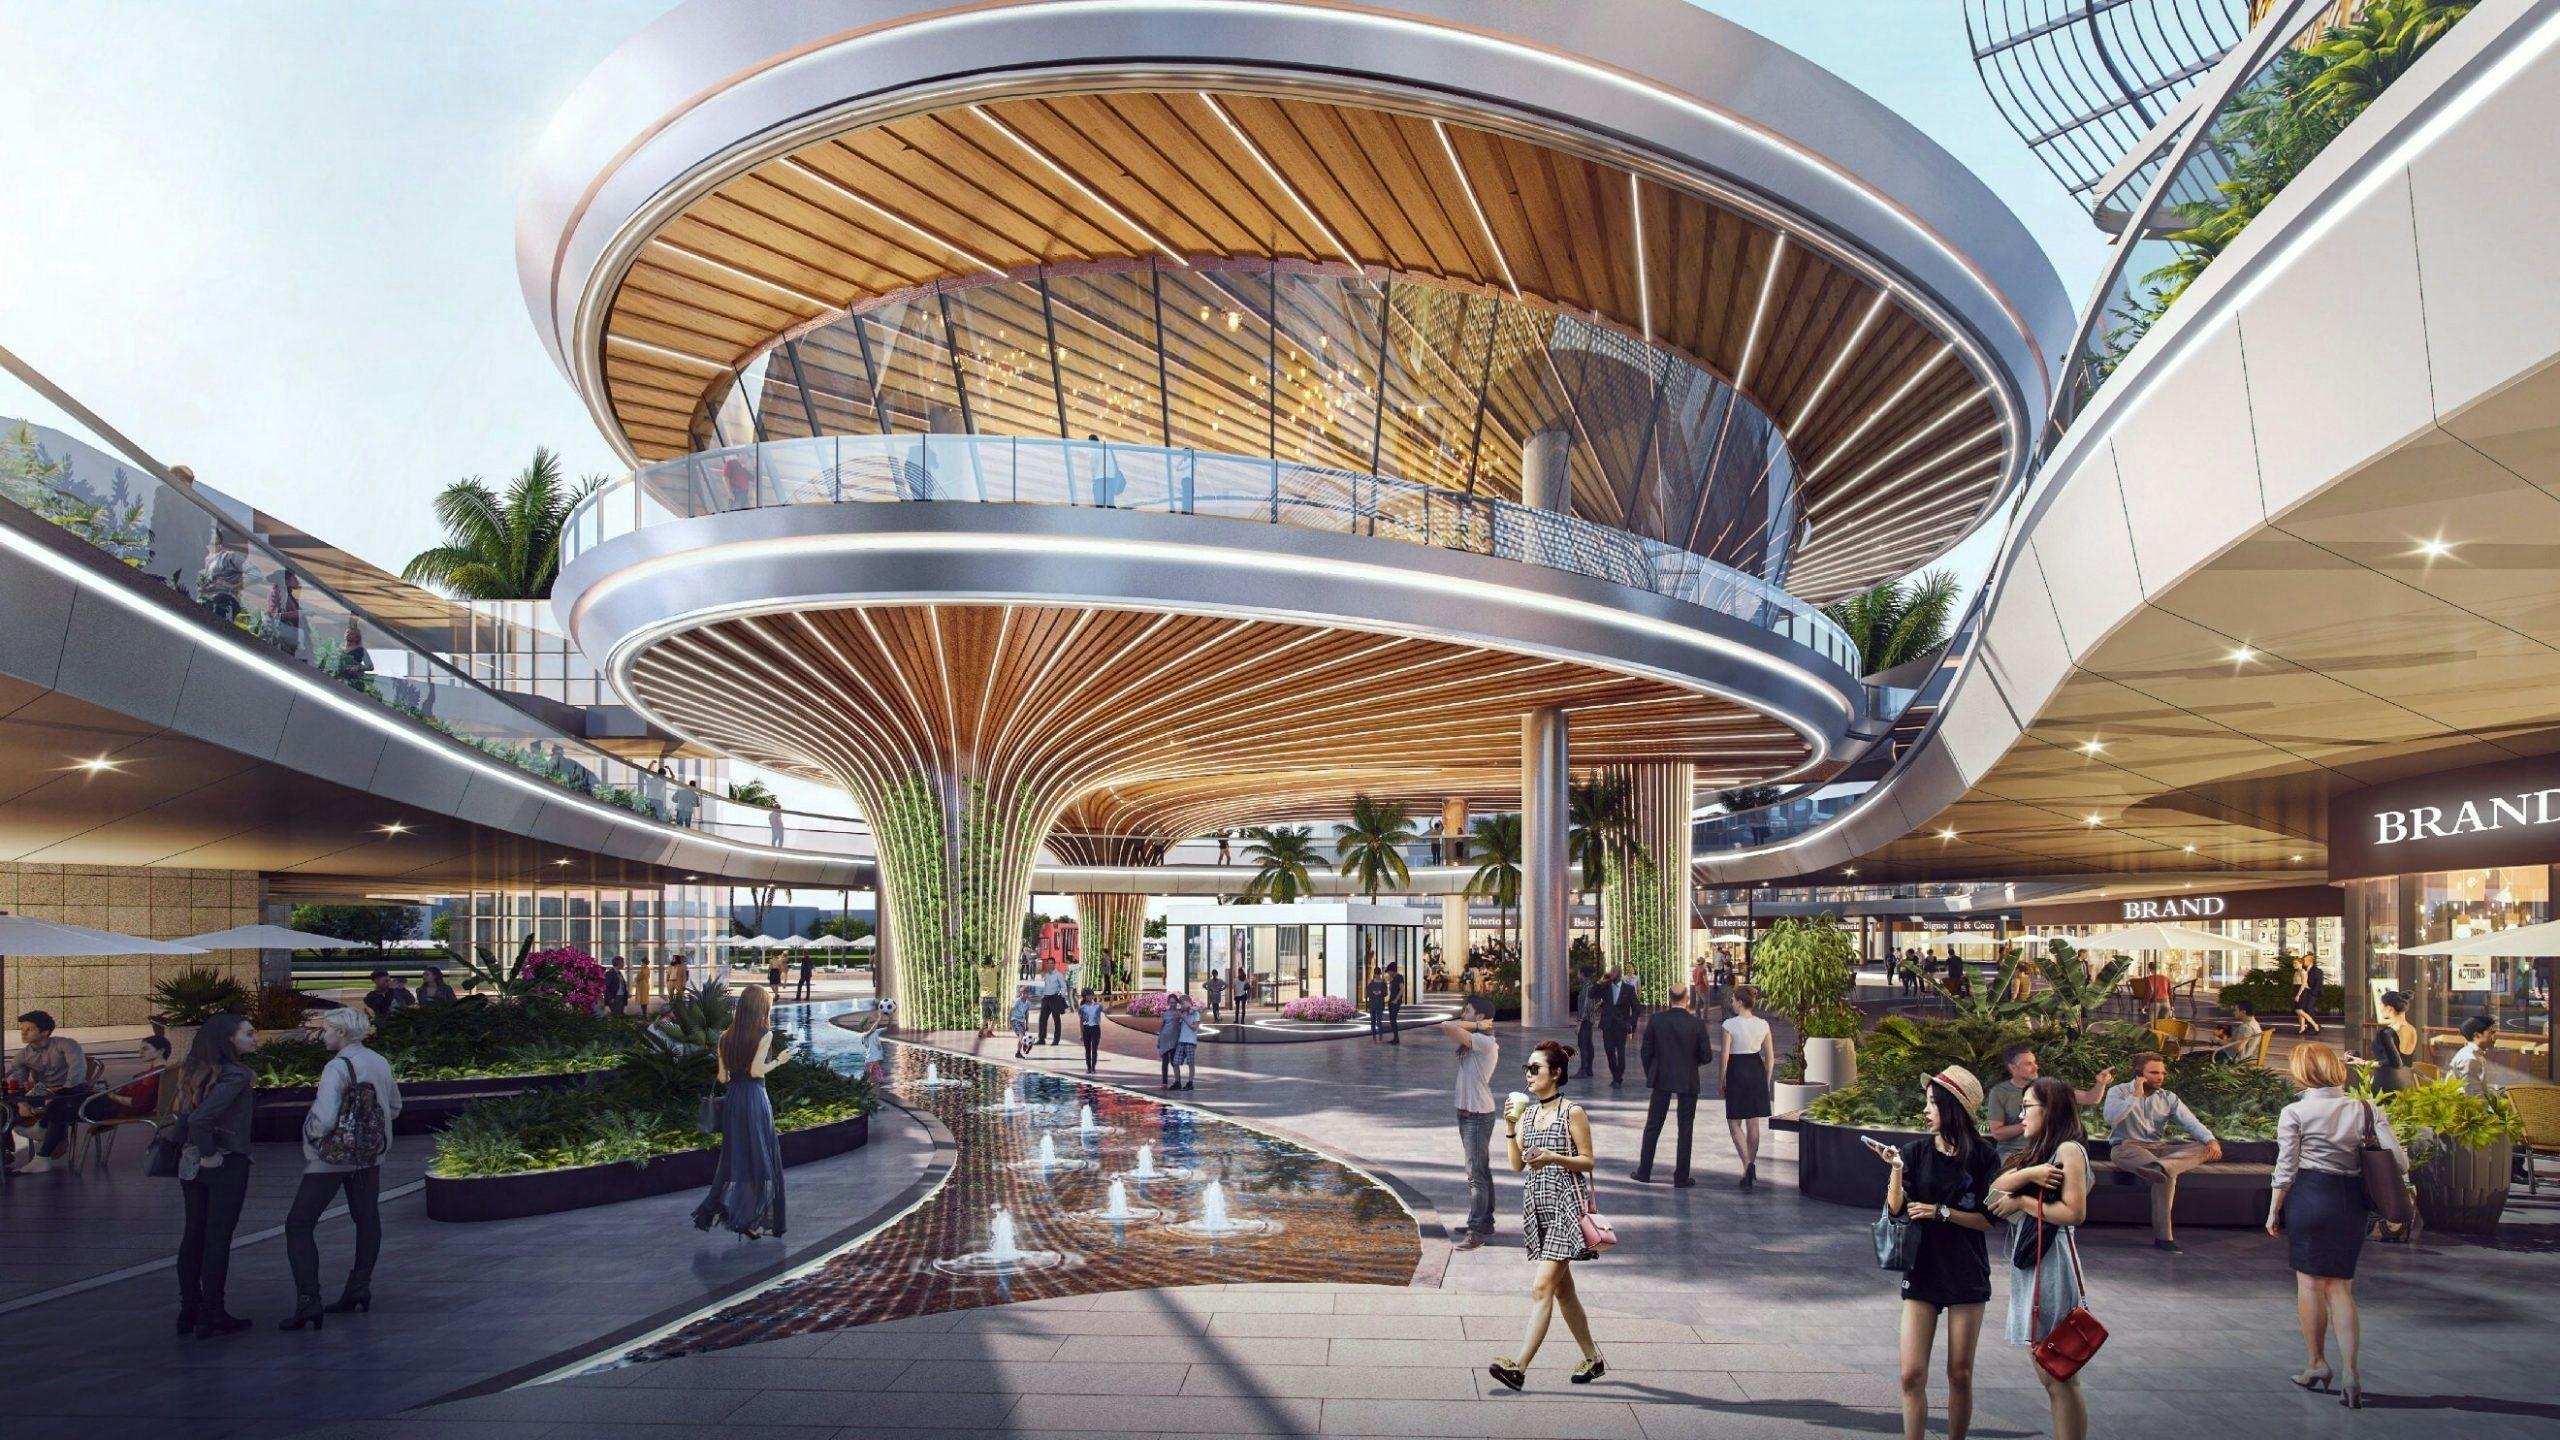 DFS Group’s new shopping complex in Yalong Bay, Sanya, is set to attract over 1,000 luxury brands and 16 million visitors per year. Photo: DFS Group